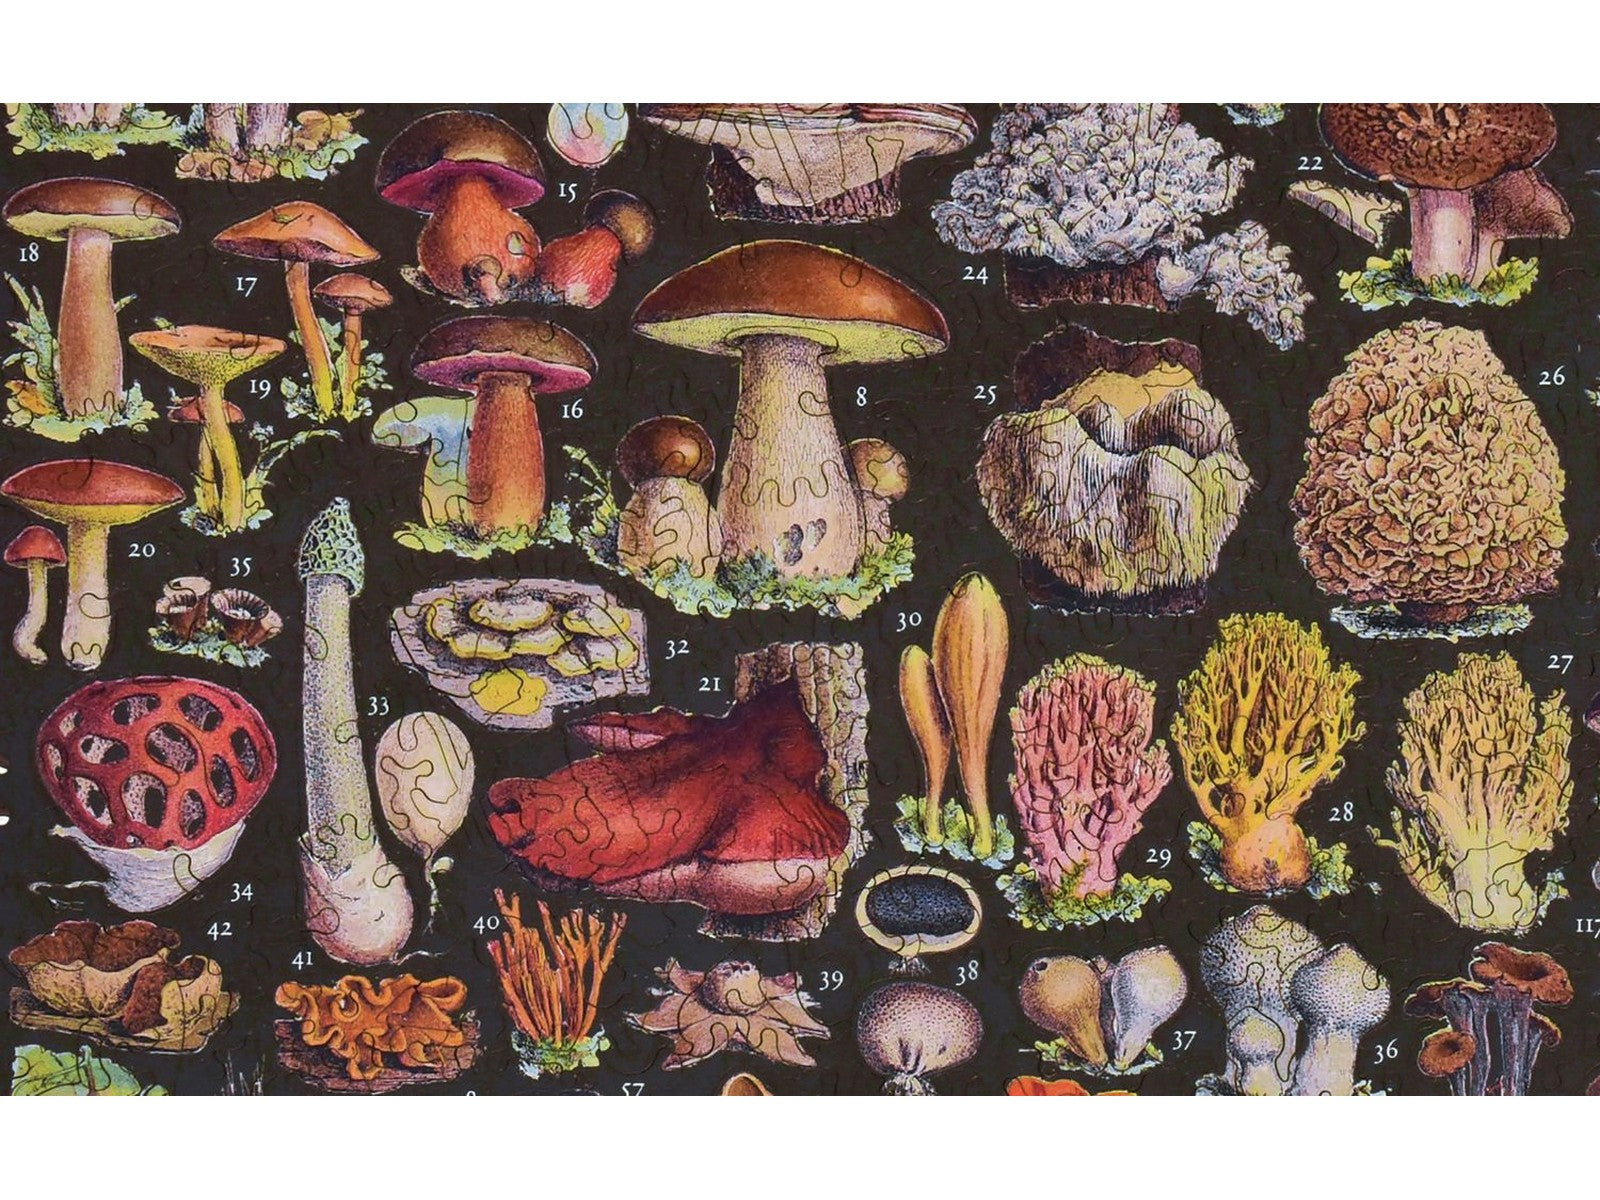 A closeup of the front of the puzzle, Mushrooms.